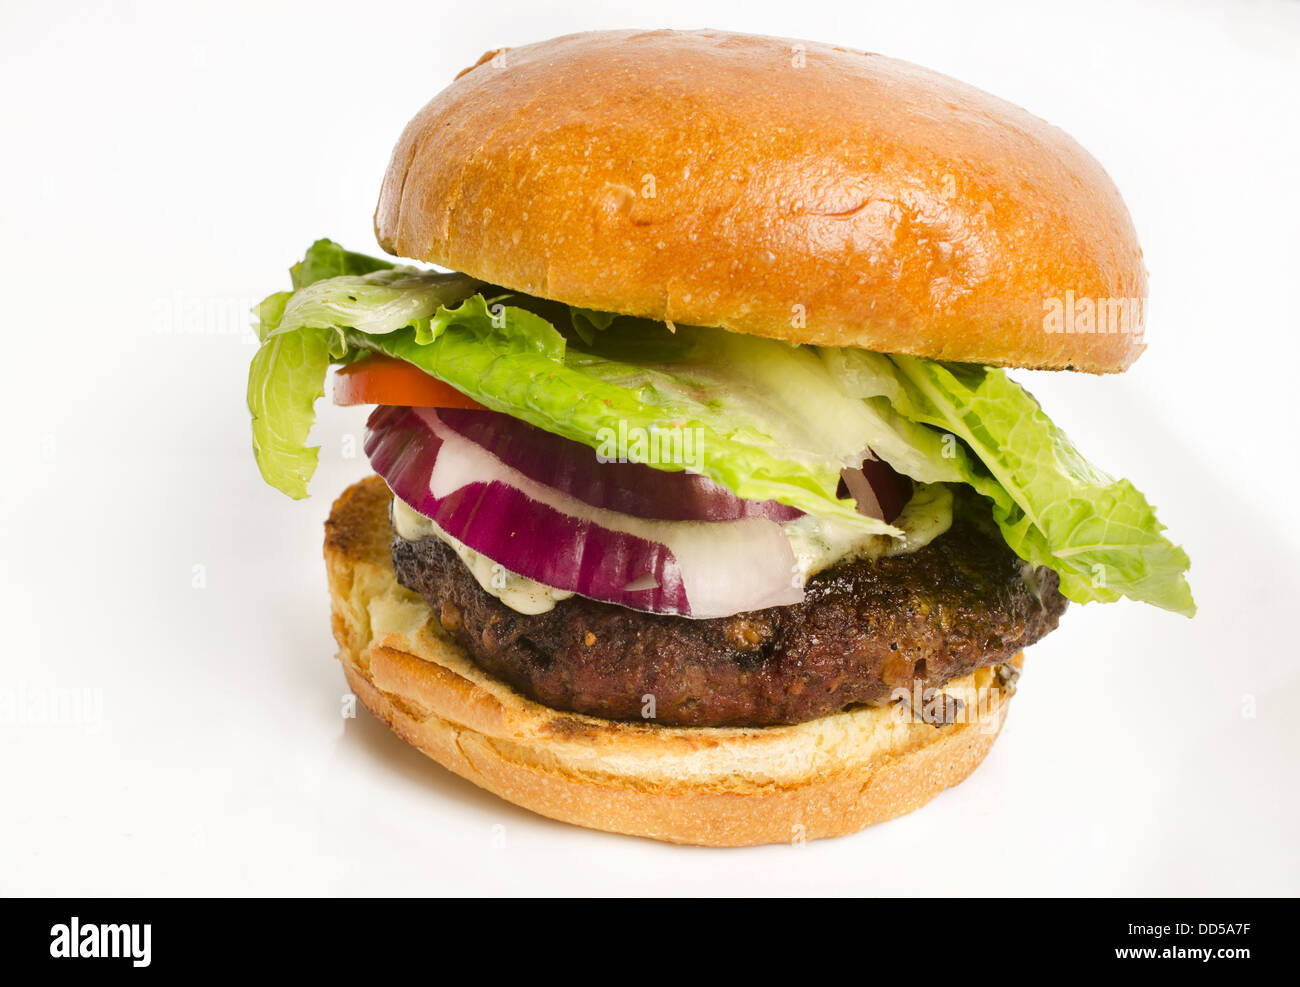 Delicious juicy cheese burger isolated against white background. Stock Photo